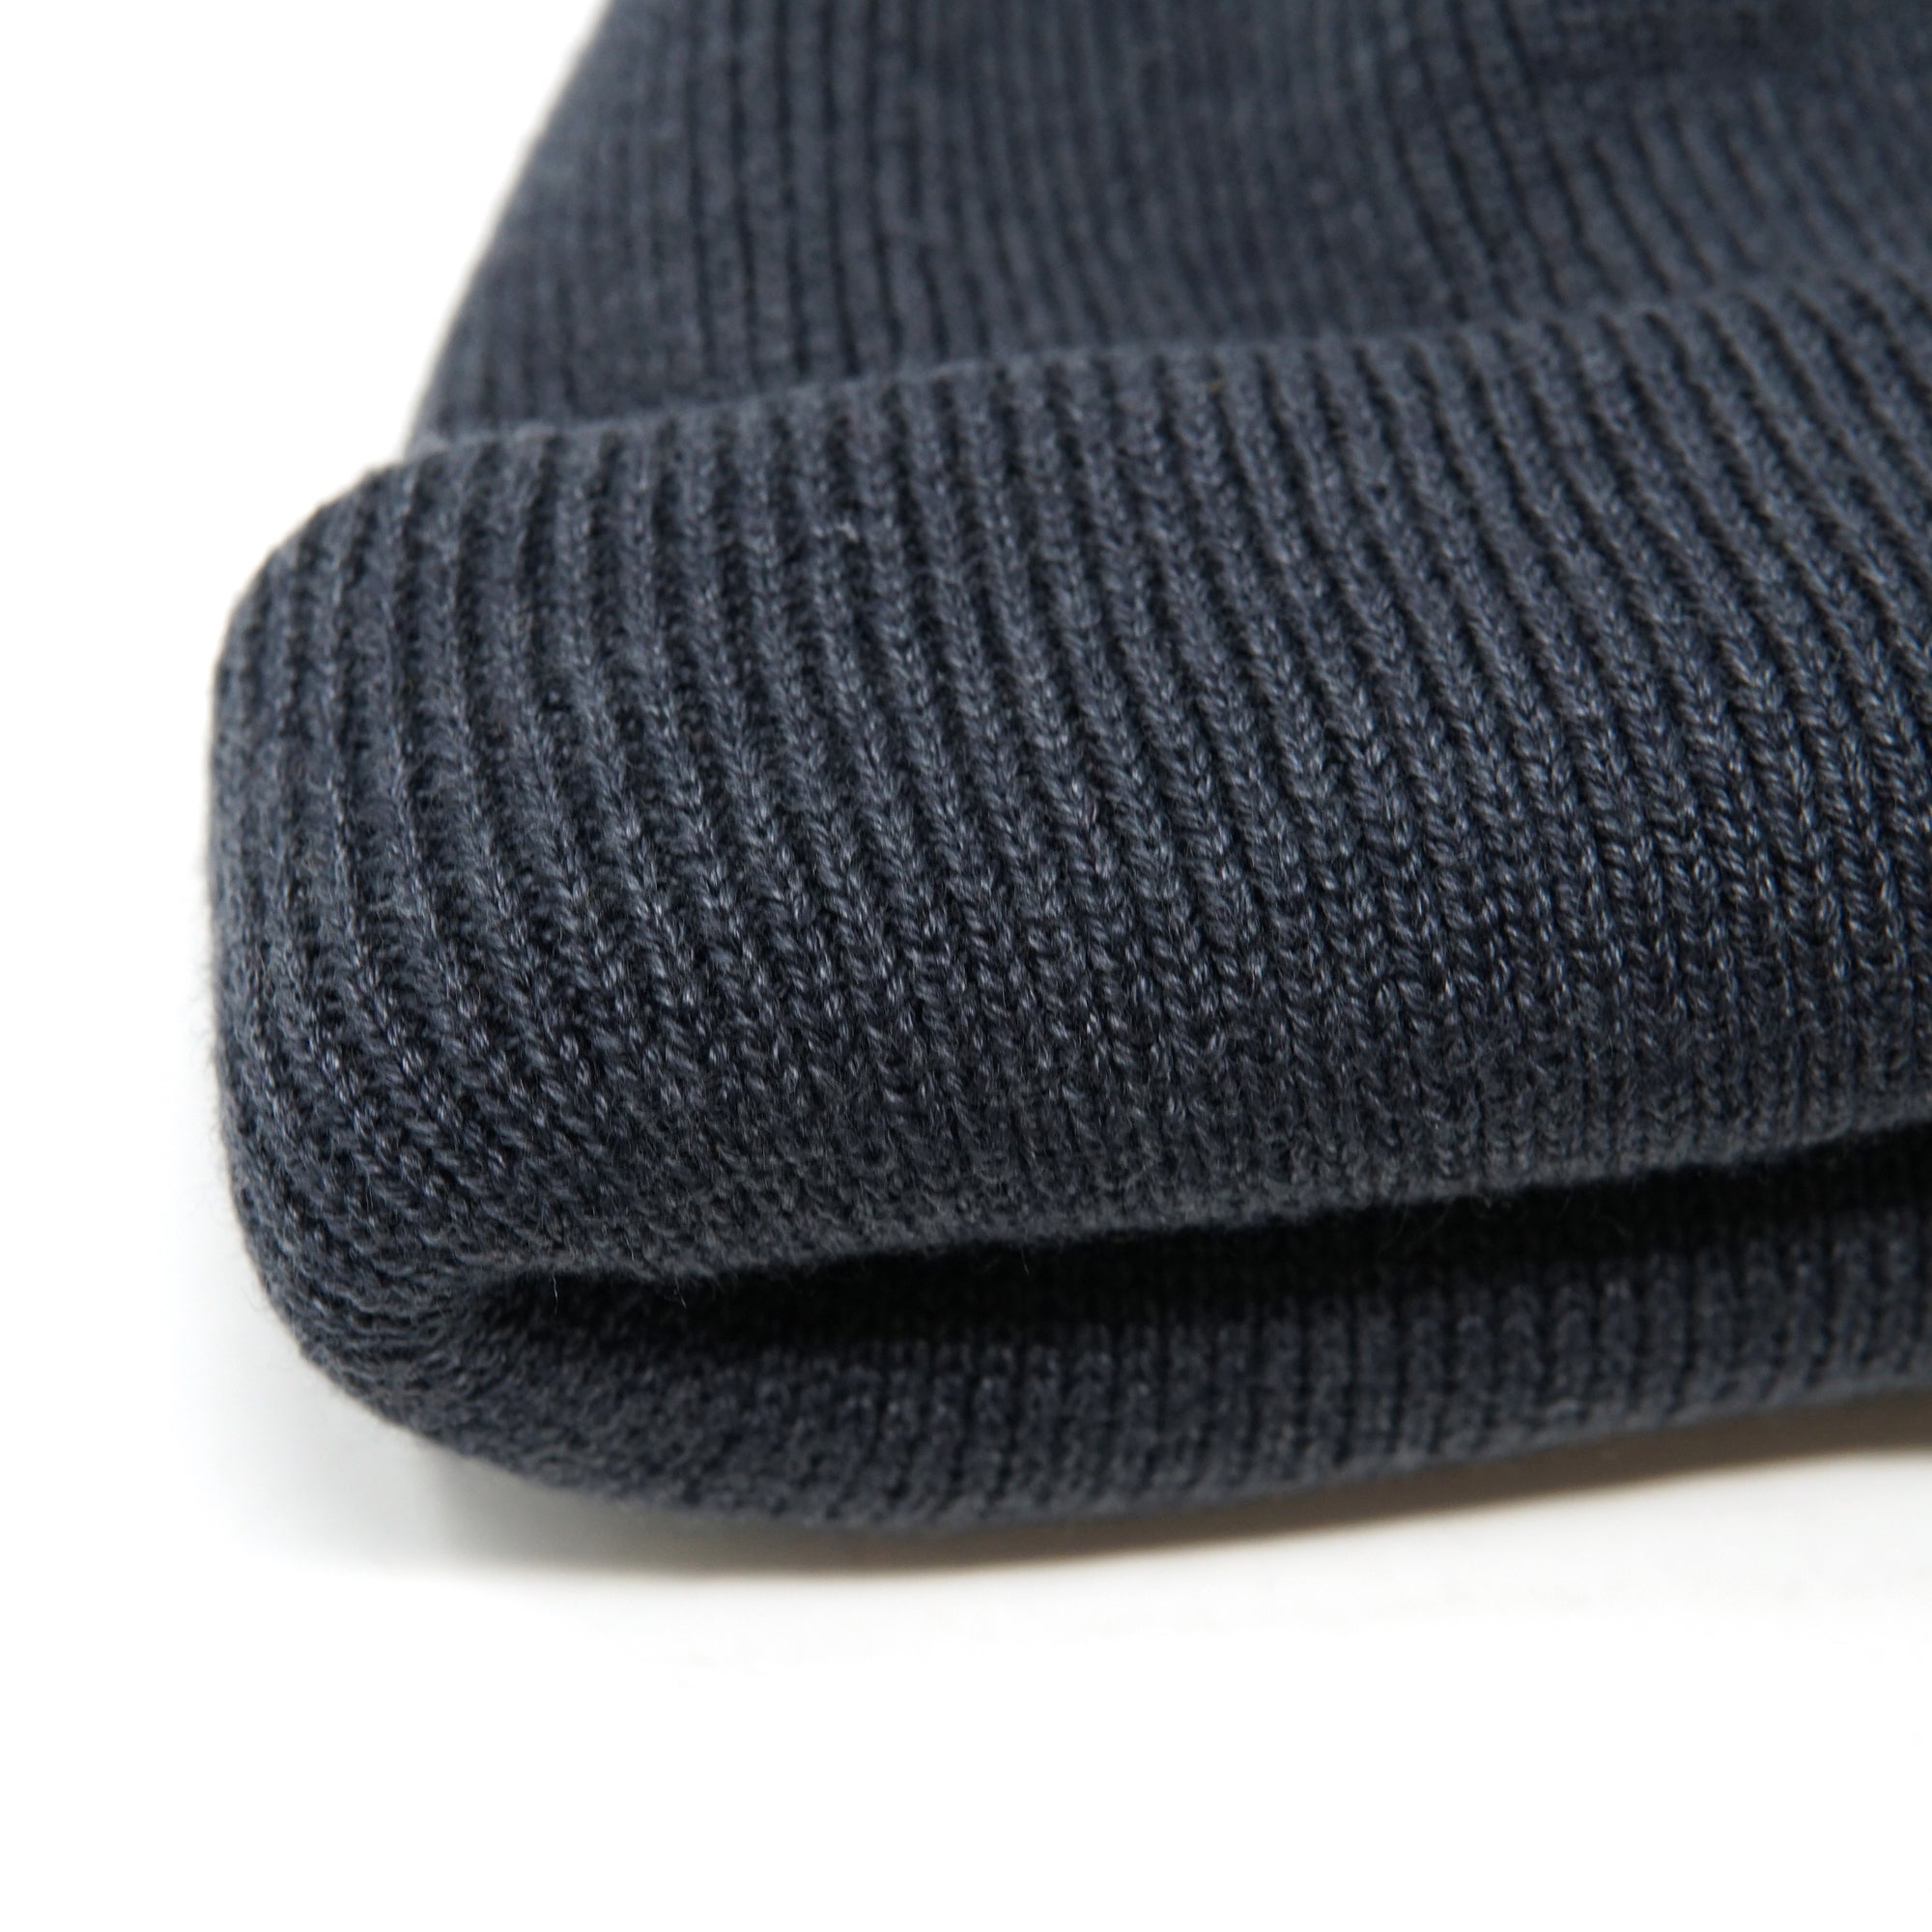 No:RL-18-935 | Name:Roll Knit Cap | Color:Green/Beige/Brown/Ivory/Red/Charcoal/Mustard/Orange/Black【RACAL_ラカル】【ネコポス選択可能】